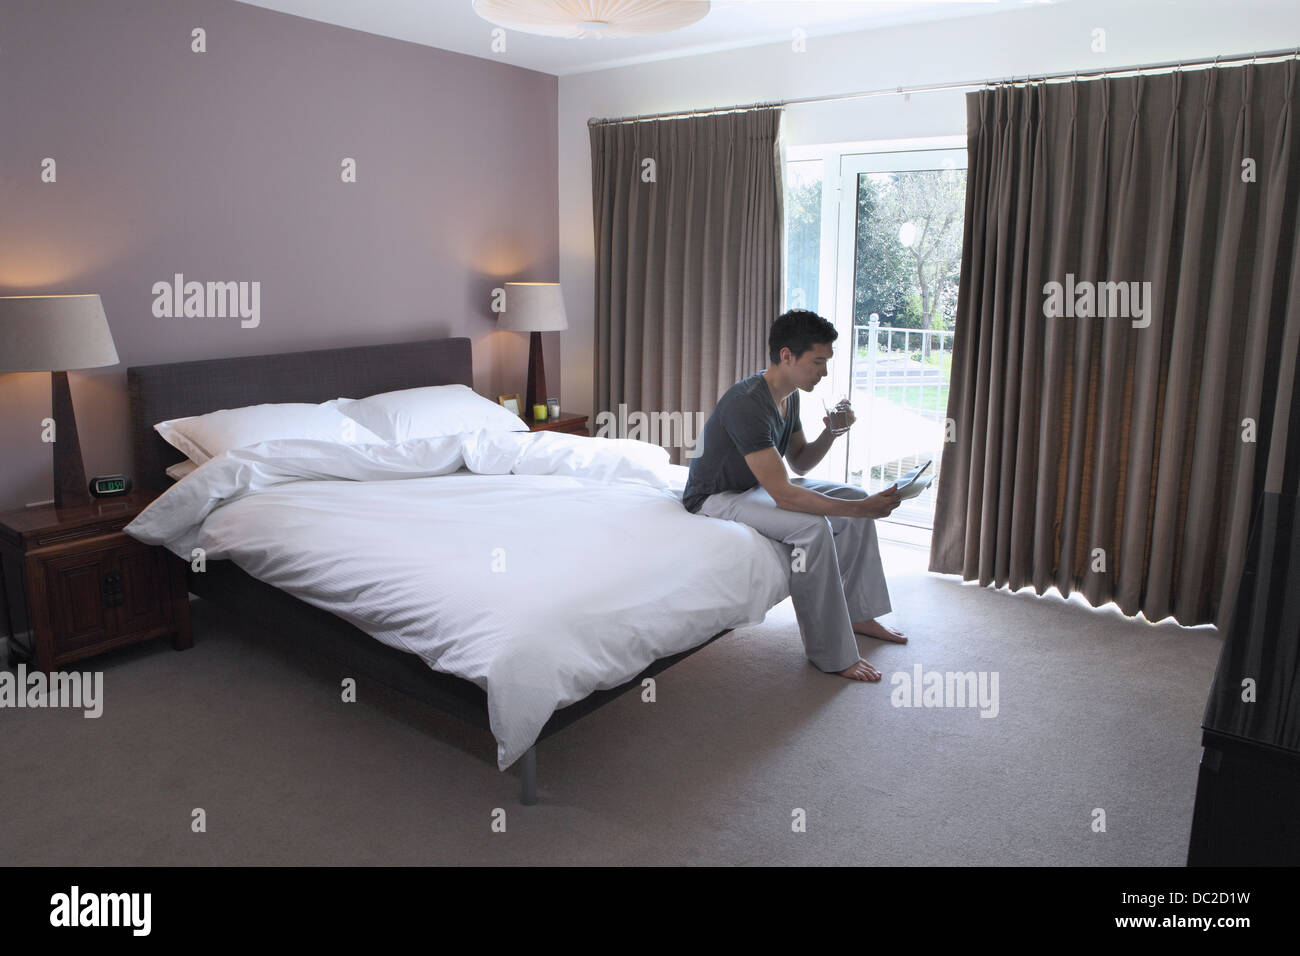 Man sitting on bed looking at digital tablet Banque D'Images